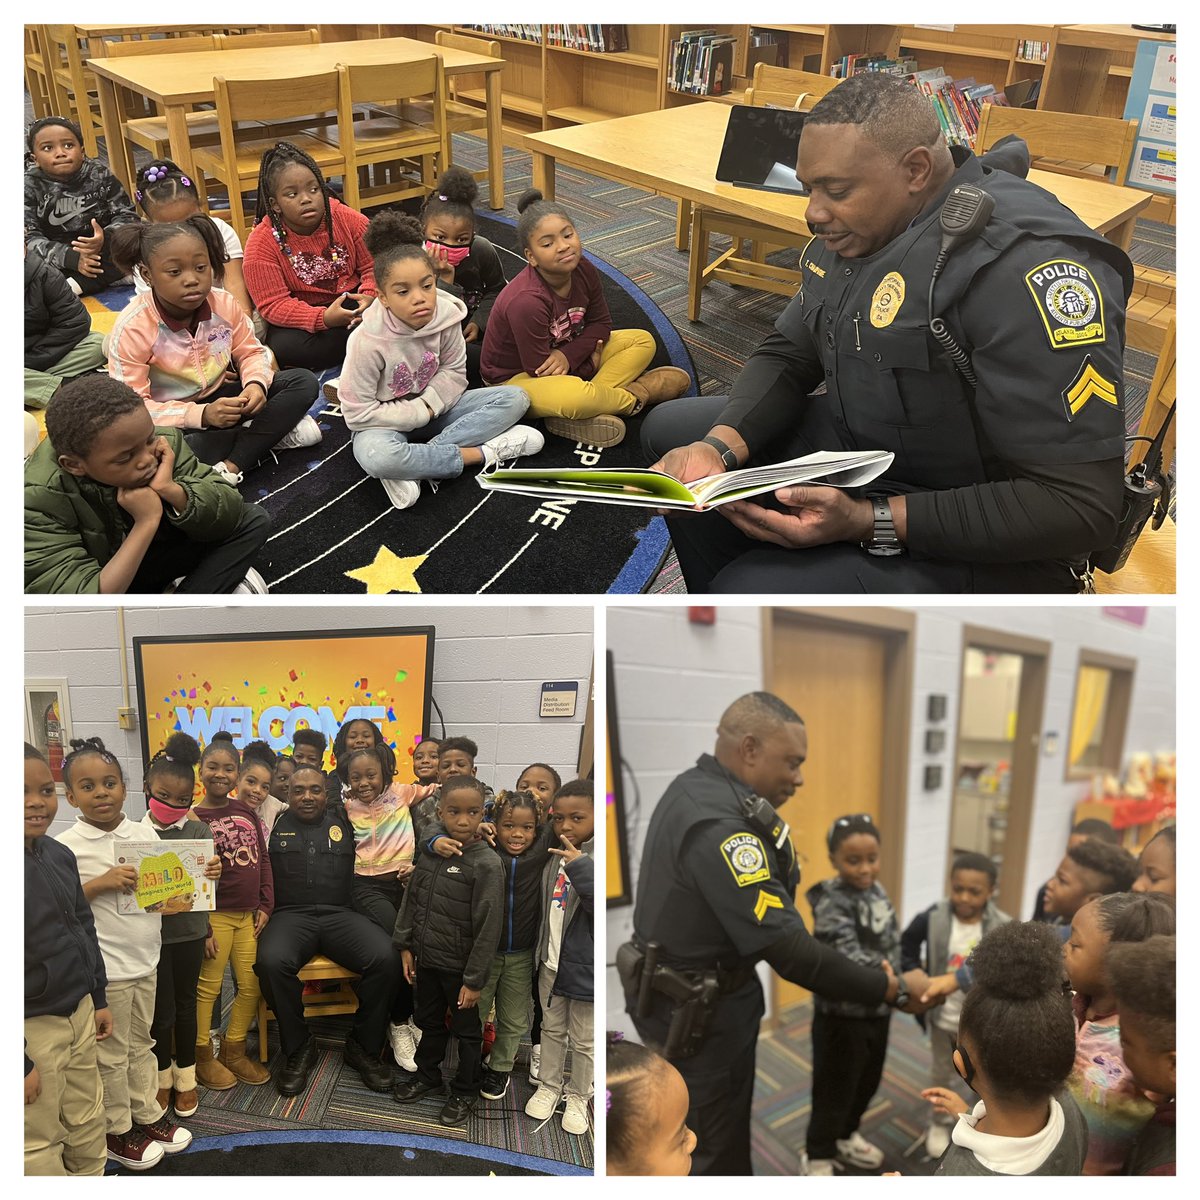 A HUGE “thank you” goes to Major Adams, Sergeant Shannon, & Corporal Champagne who read the October SEL Book of the Month to our 2nd graders @APSHeritage! 2 down, 2 more to go! #BooksandBadges @SEL_APS @APSMediaServ @APSPolice @sara_womack @apsupdate @TharveyHeritage